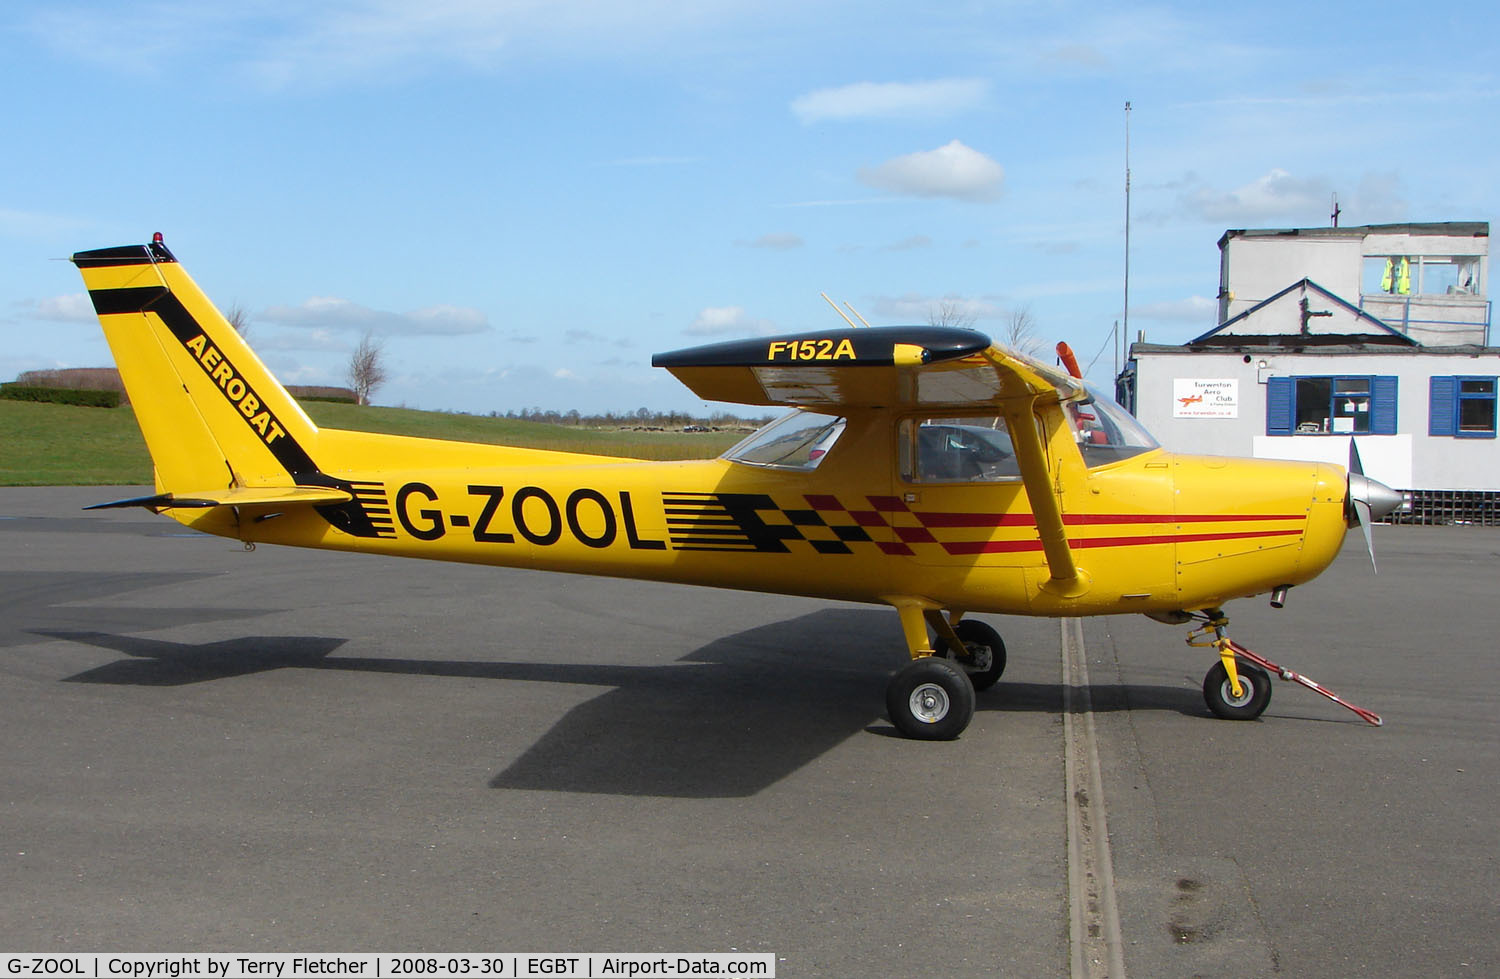 G-ZOOL, 1979 Reims FA152 Aerobat C/N 0357, The Buckinghamshire airfield at Turweston always has a good variety of aircraft movements